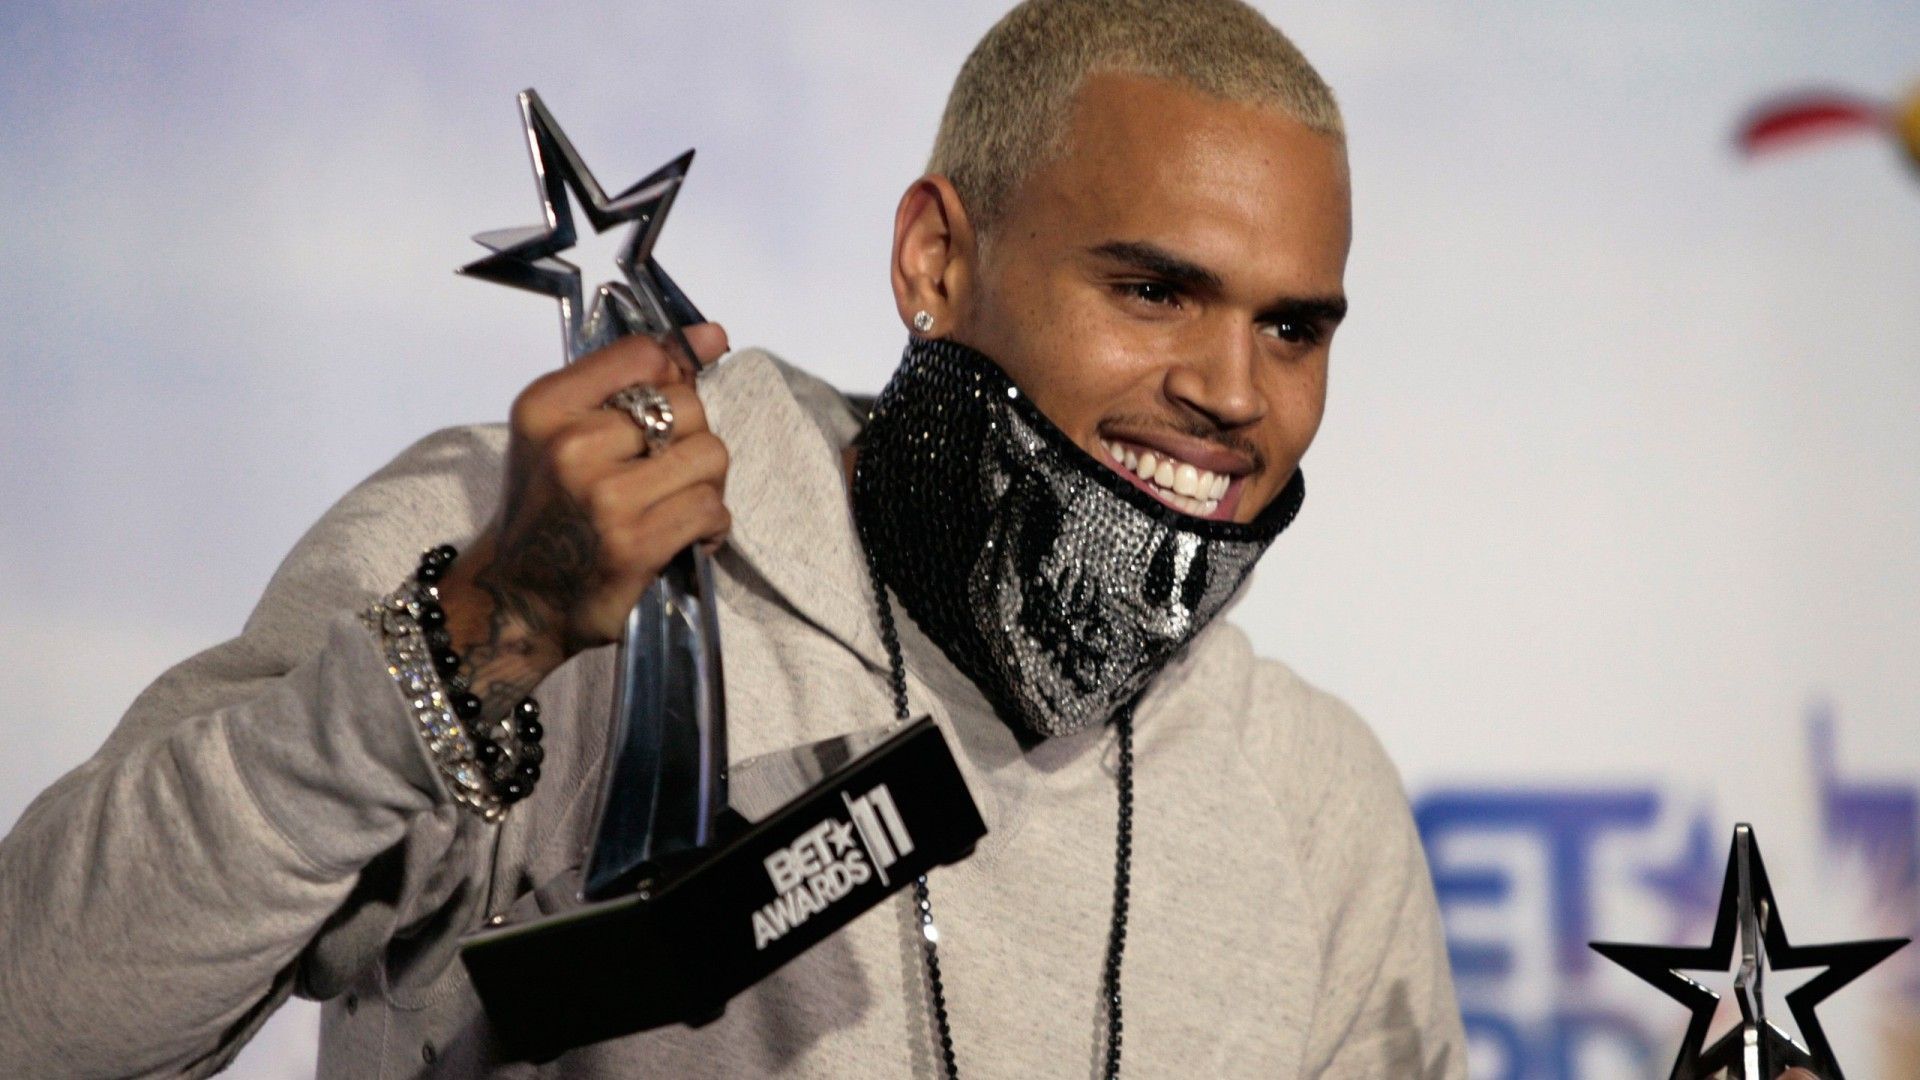 Chris-Brown-Full-HD-Wallpapers - YoYoWallpapers: Download Today's ...